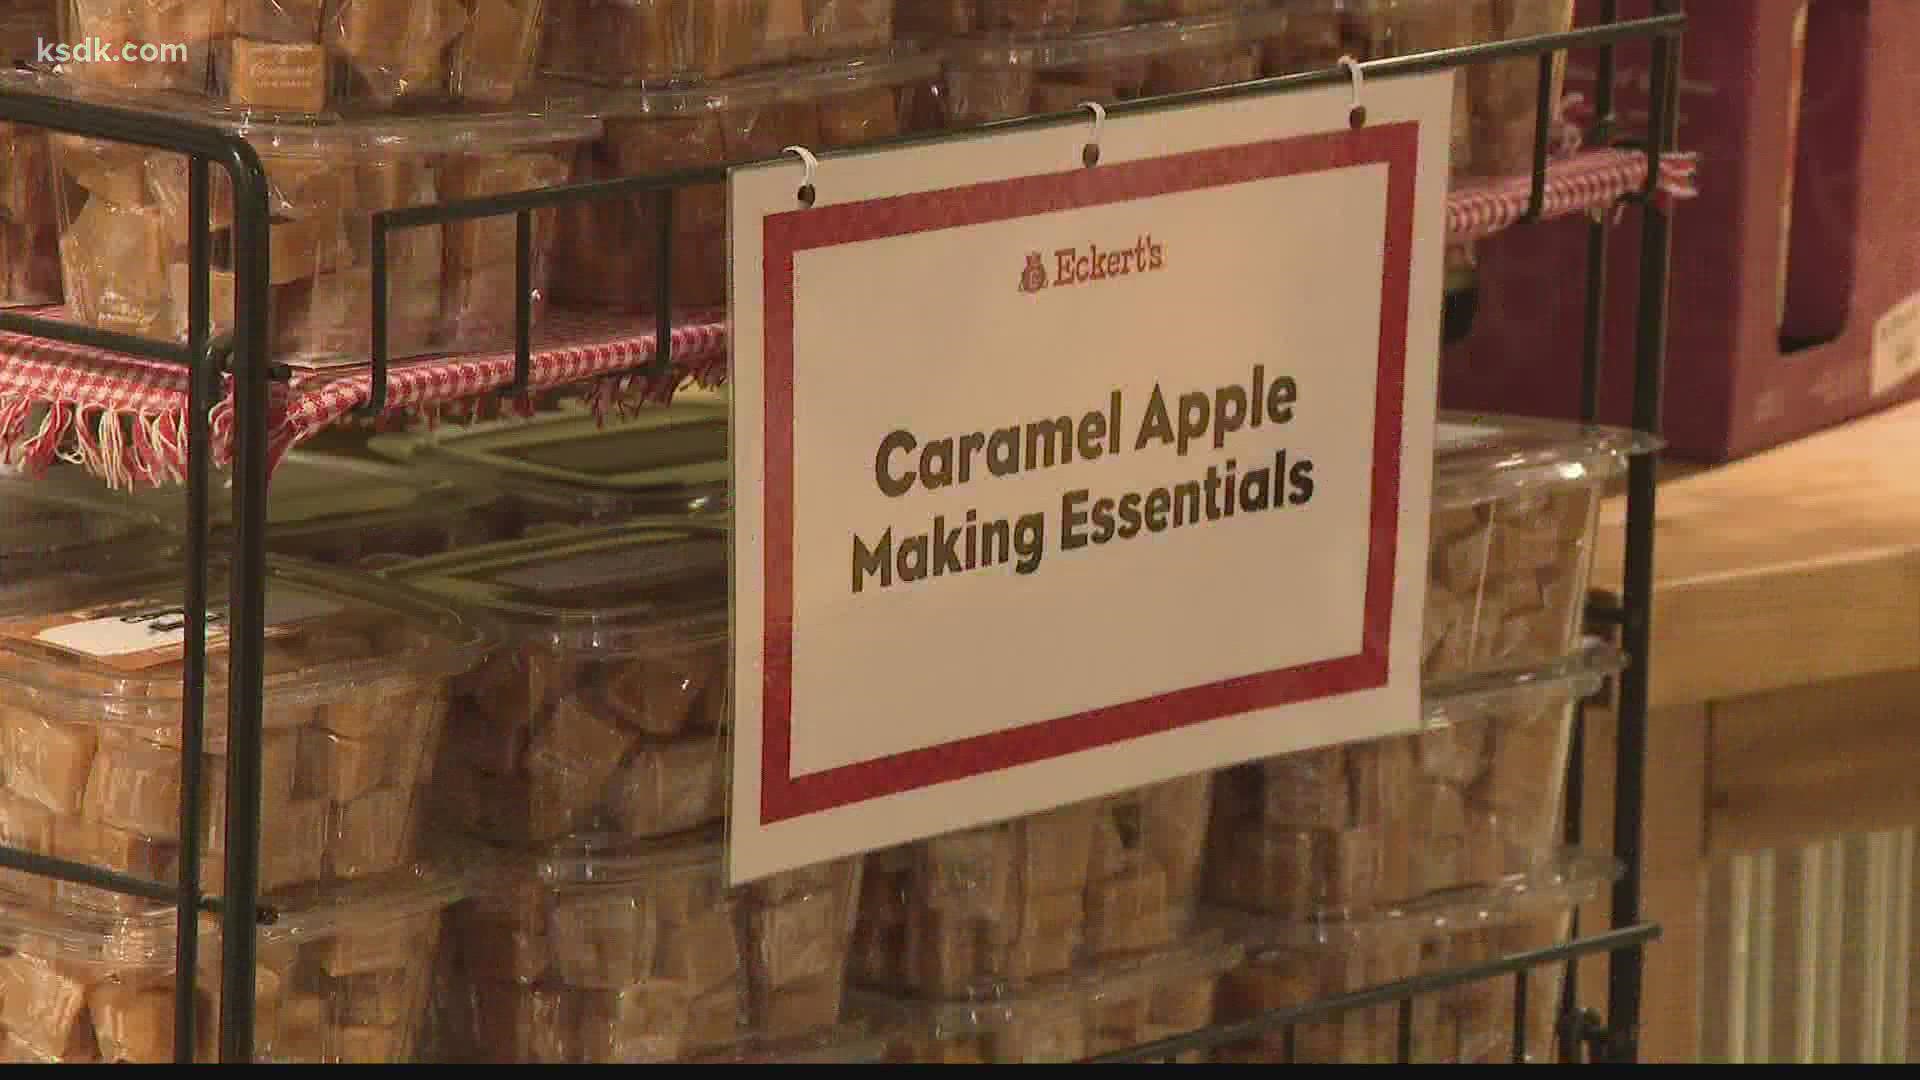 From sweet cider to hard cider, Eckert's planning to embrace all things apple.